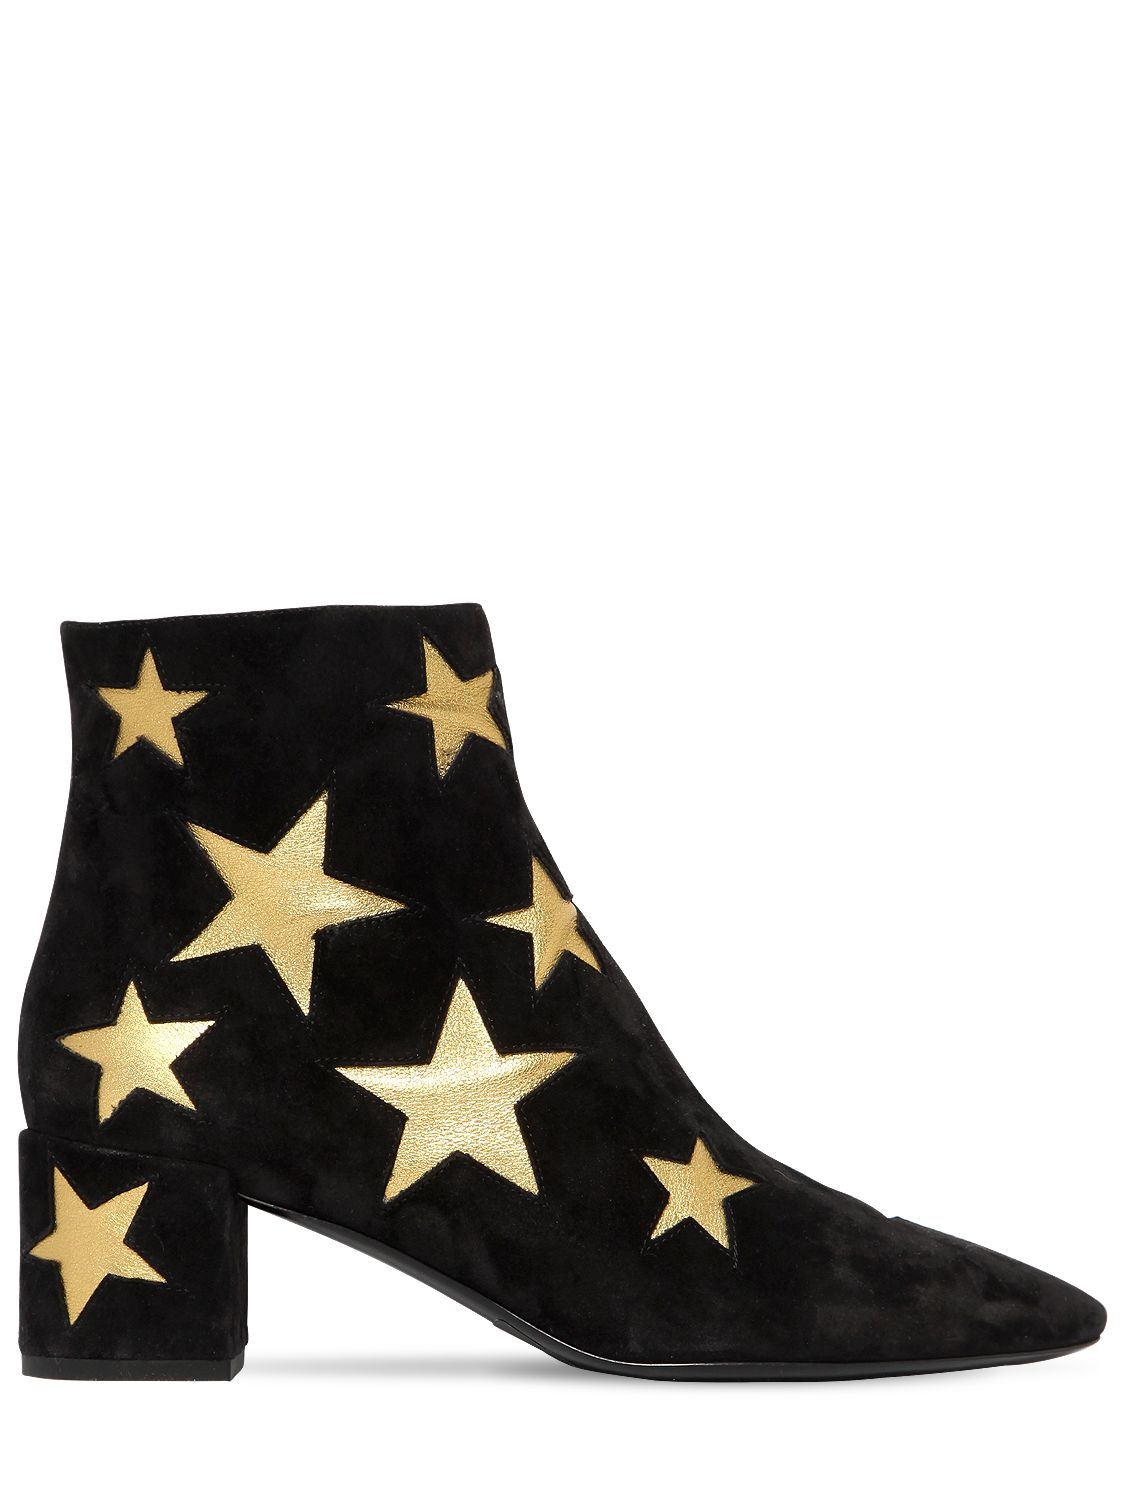 SAINT LAURENT 50MM LOULOU STAR SUEDE ANKLE BOOTS,70IG5D014-MTA4NW2